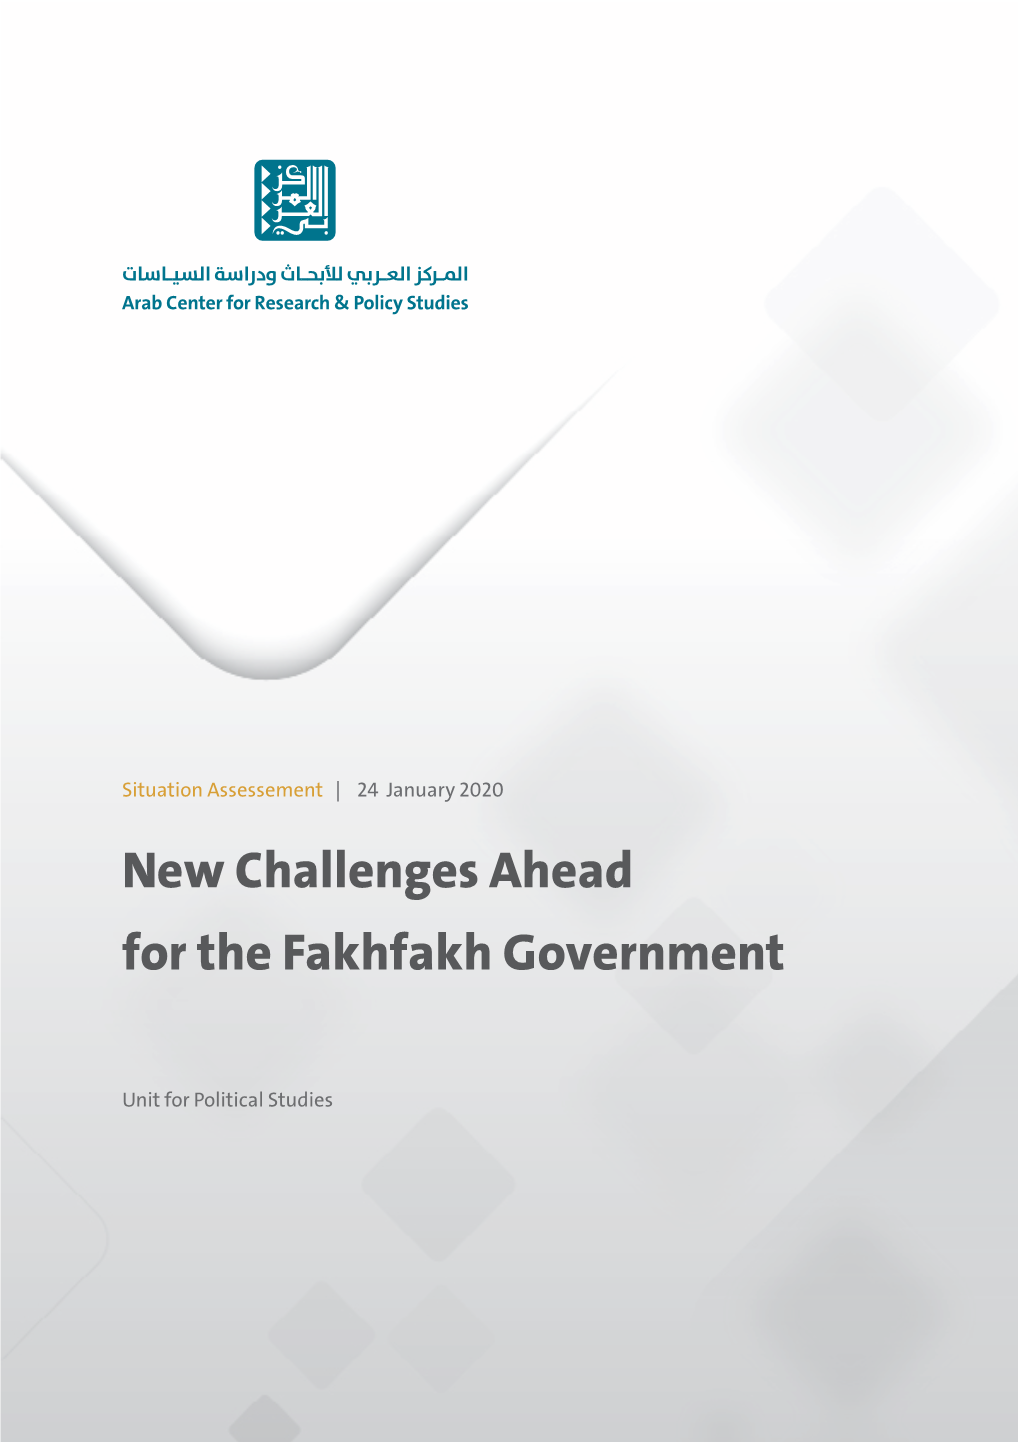 New Challenges Ahead for the Fakhfakh Government